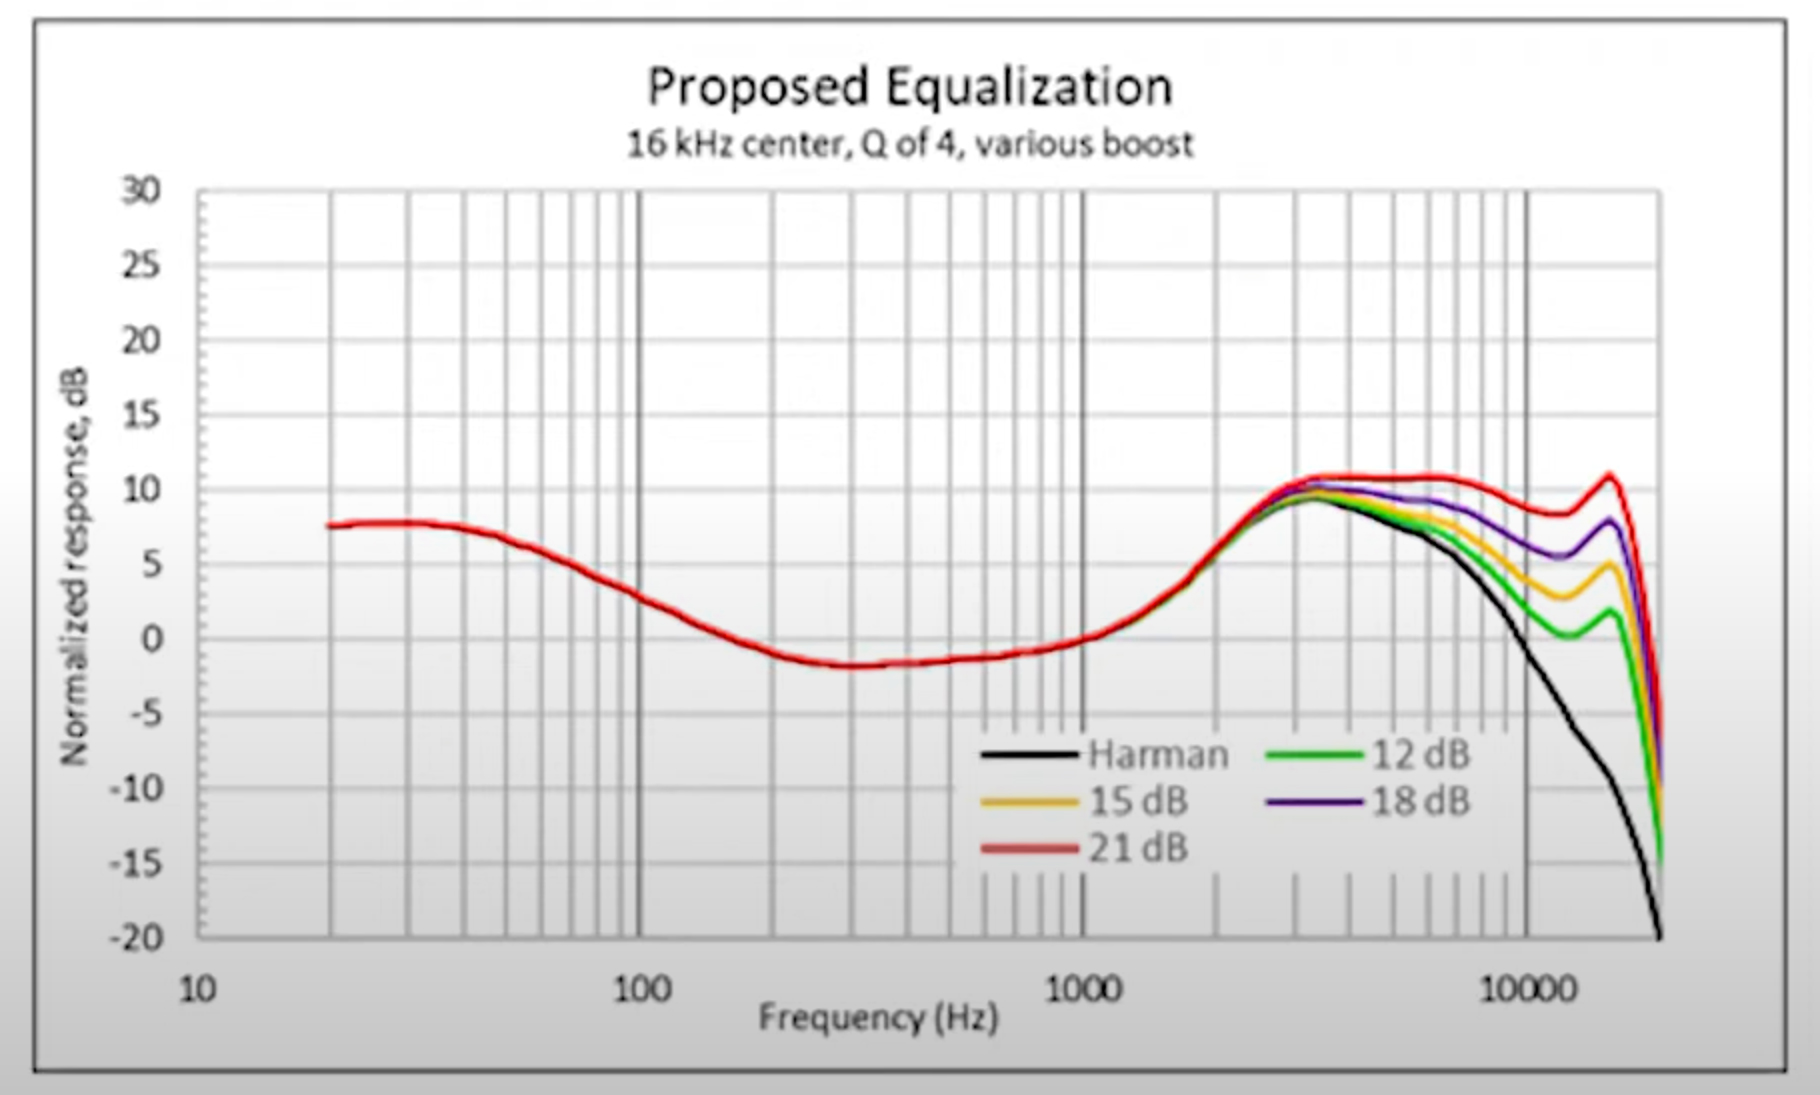 Knowles corp's proposed adjustments to equalize to different users' high-frequency loss thresholds.